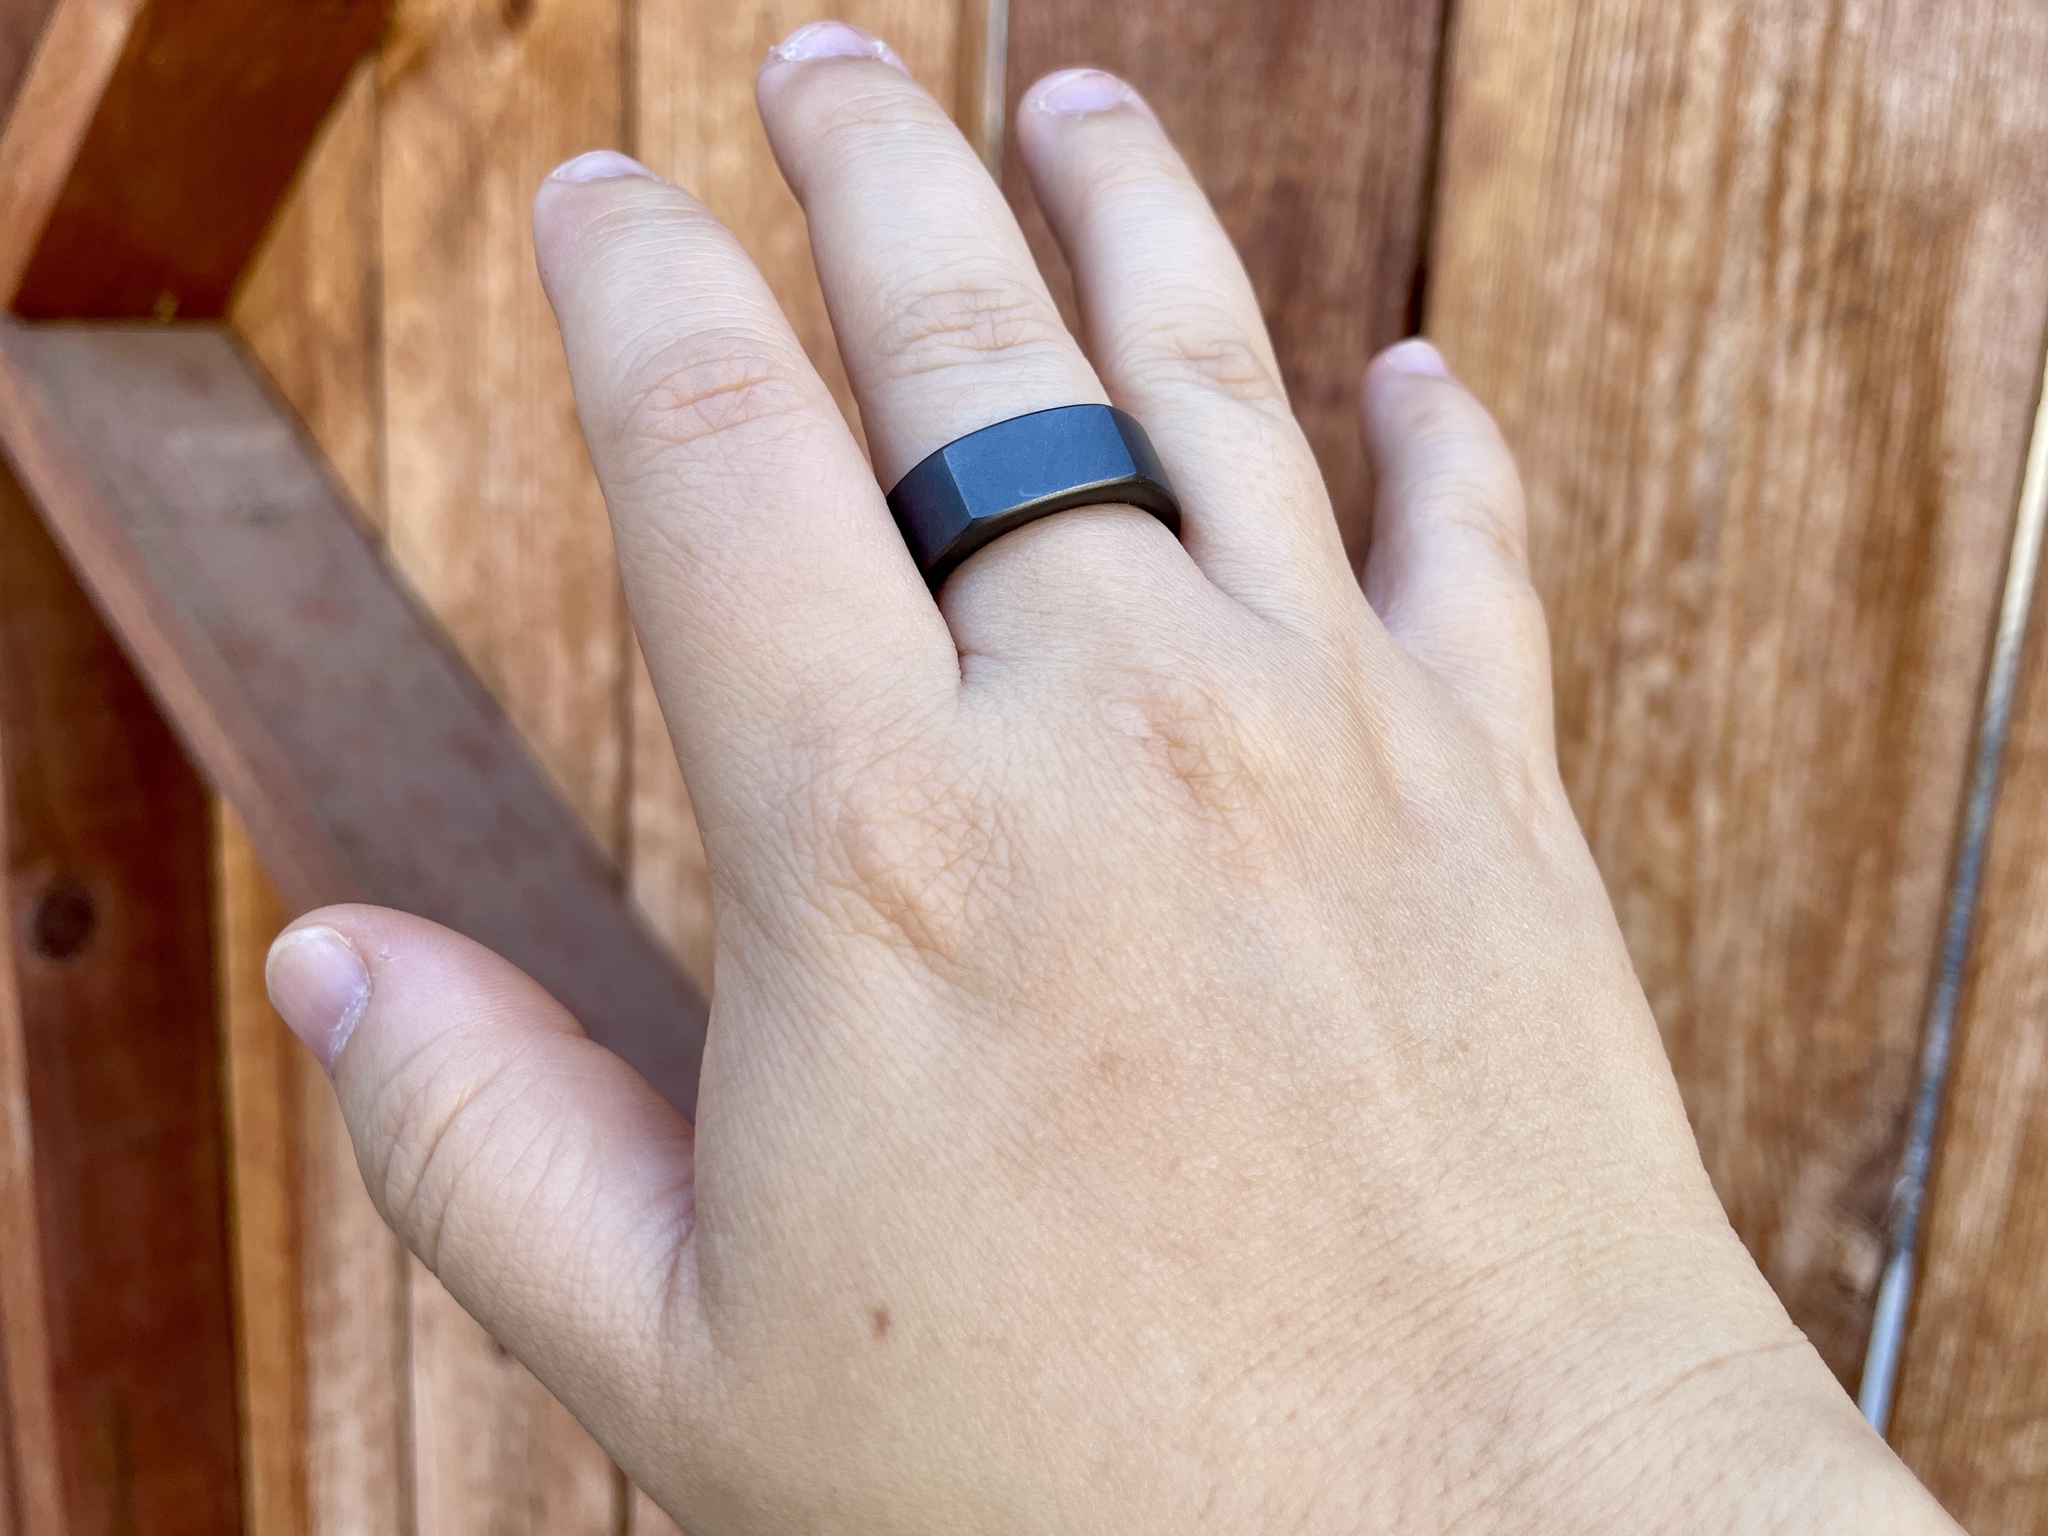 High-tech mood ring predicts how your day will go